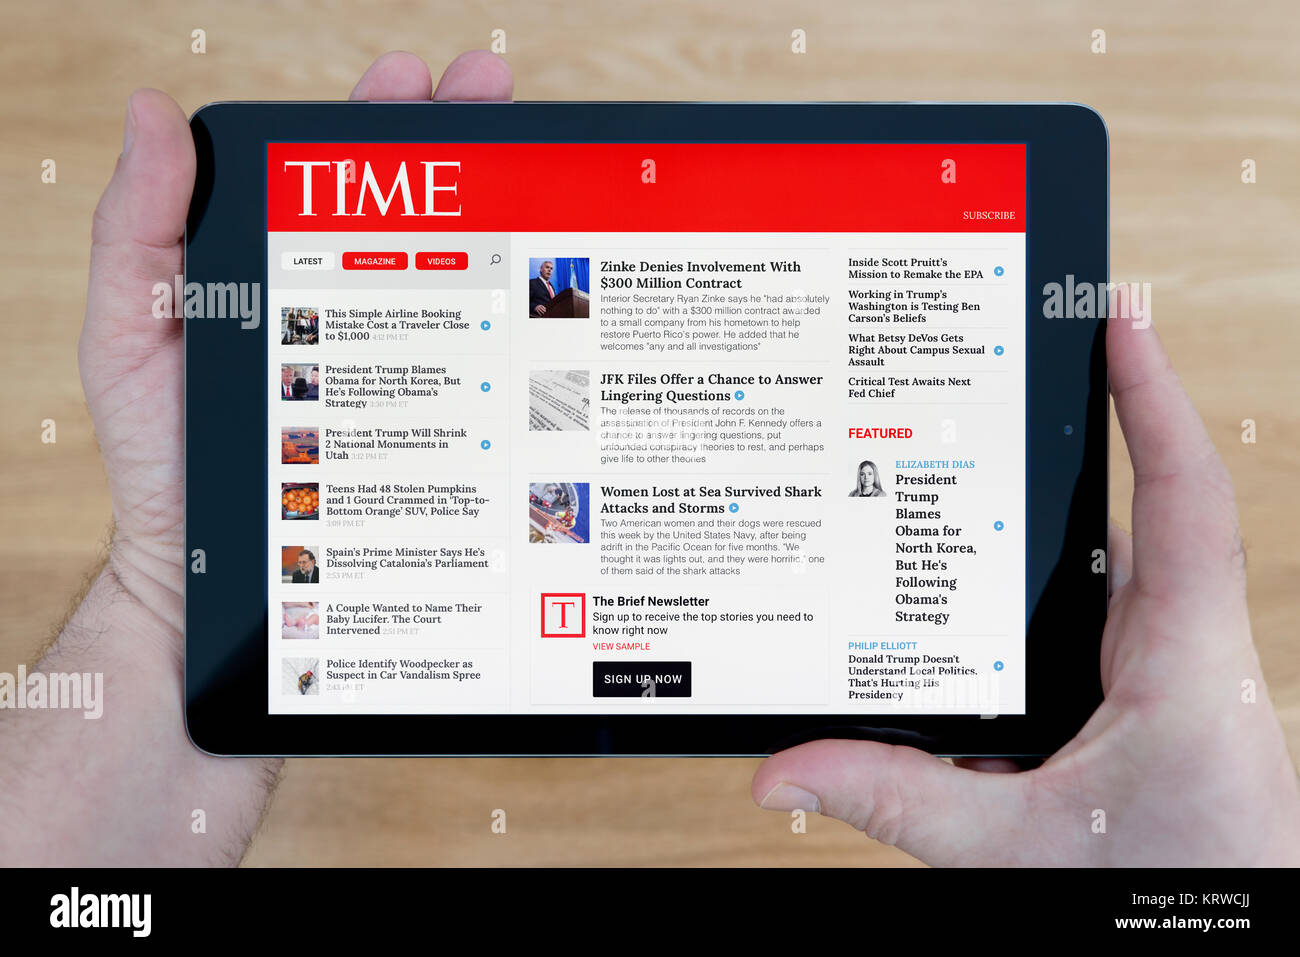 A man looks at the Time Magazine website on his iPad tablet device, shot against a wooden table top background (Editorial use only) Stock Photo